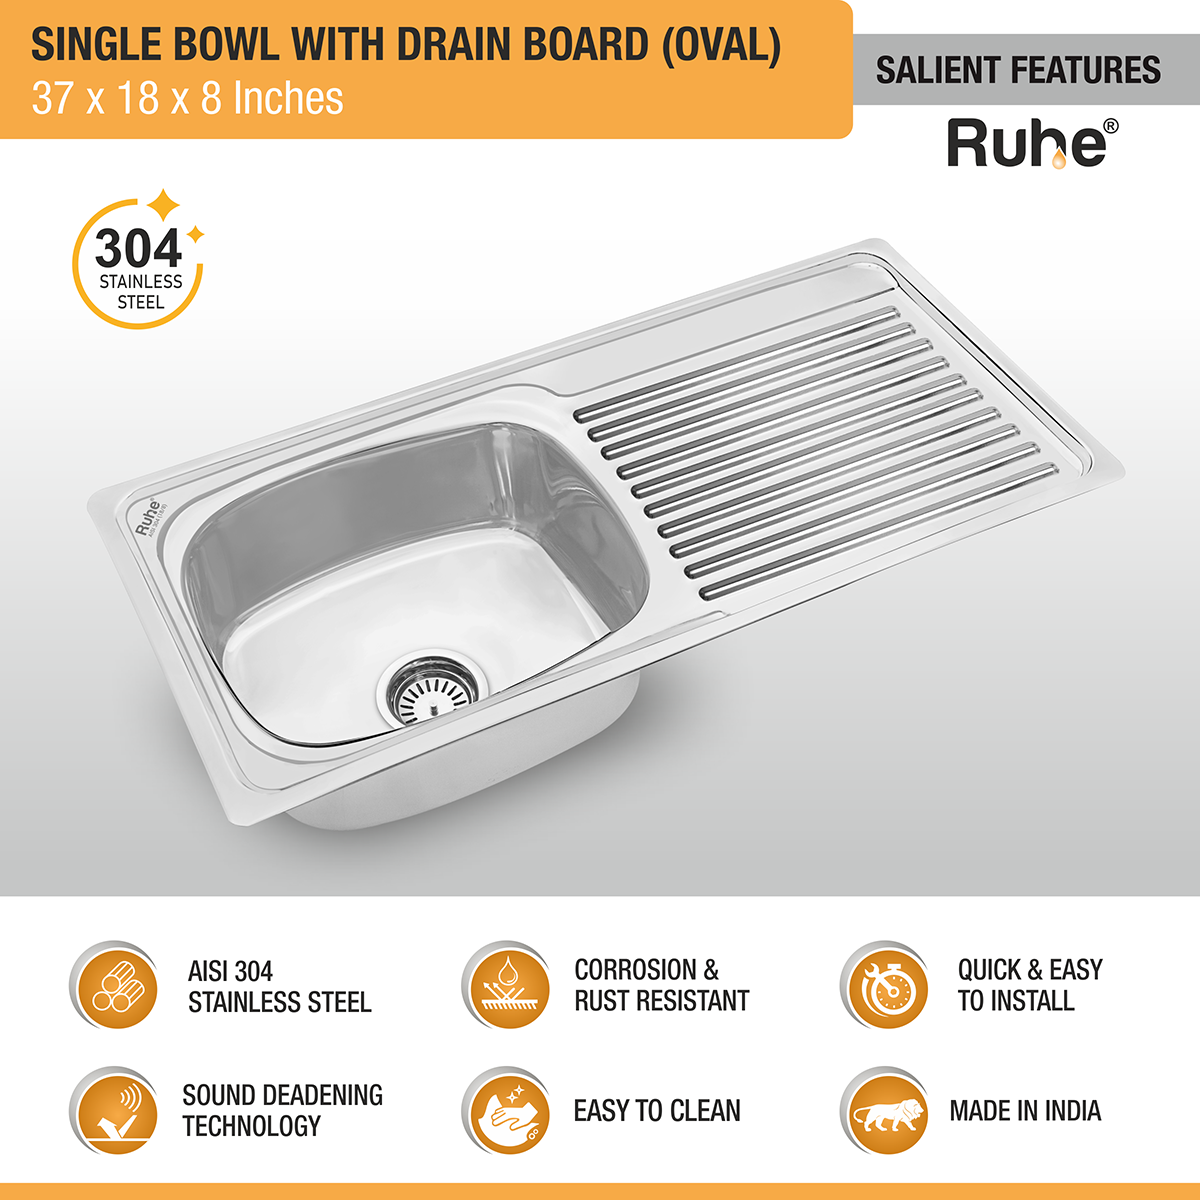 Oval Single Bowl (37 x 18 x 8 inches) 304-Grade Stainless Steel Kitchen Sink with Drainboard features and benefits